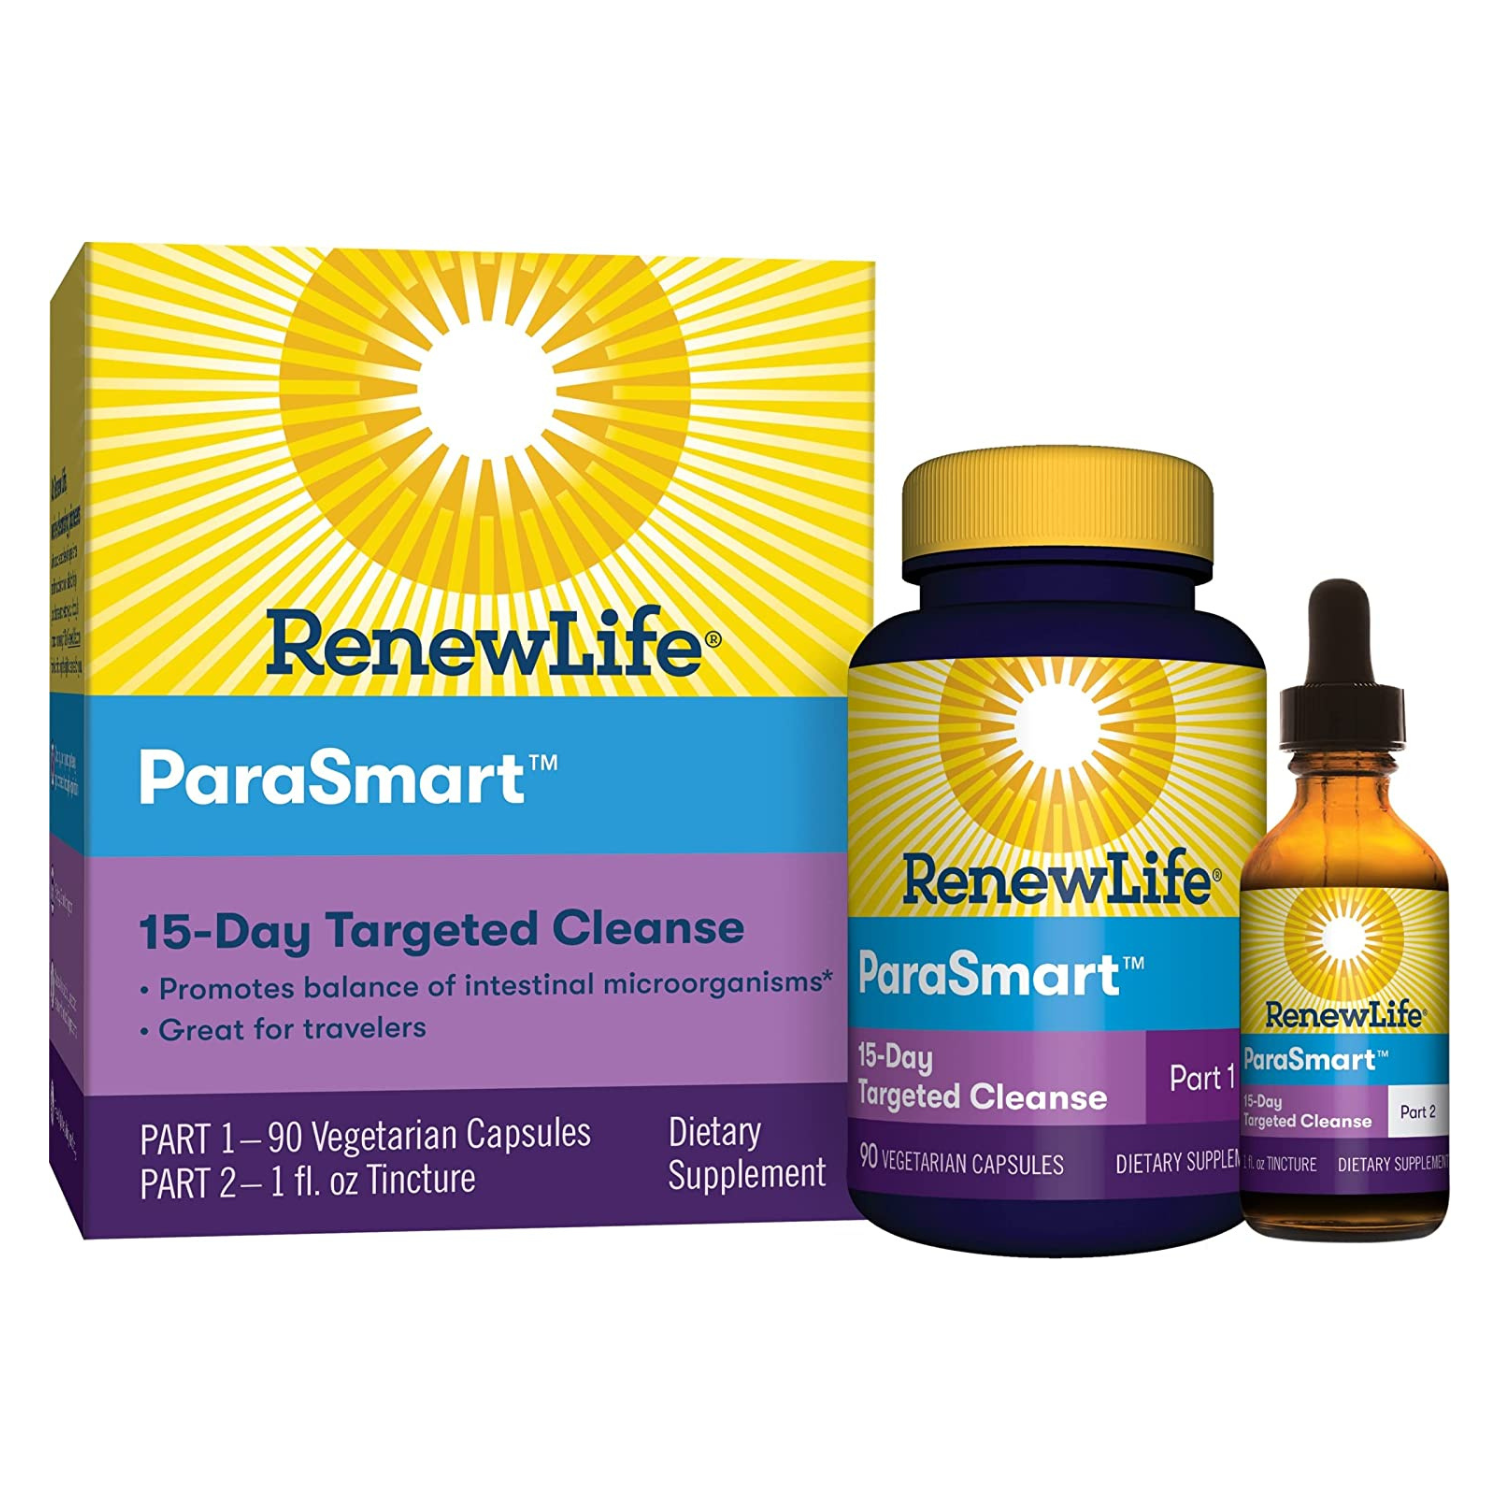 Renew Life - PARASmart, Microbial Targeted Cleanse, 15-Day Program - 90 Veg Capsules + 1 Fl. Oz. Tincture